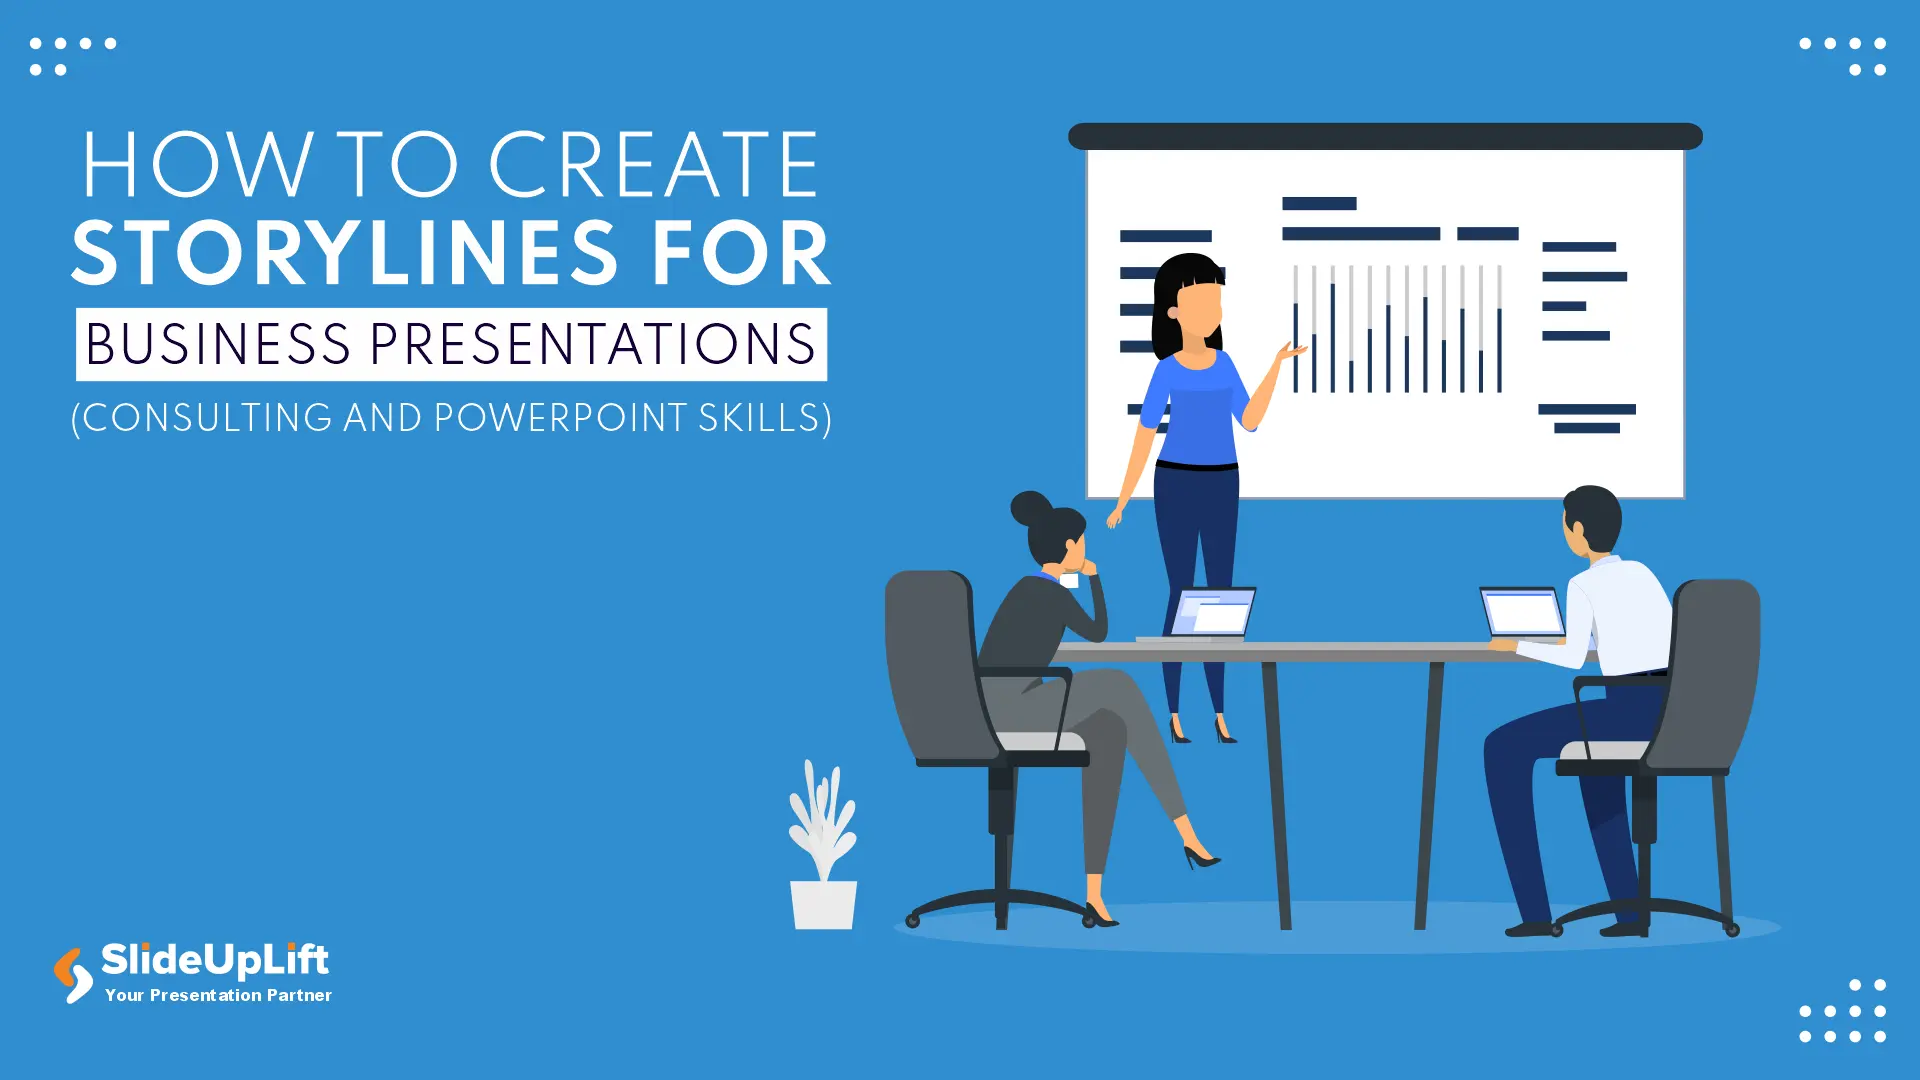 How To Create Storylines For Business Presentations